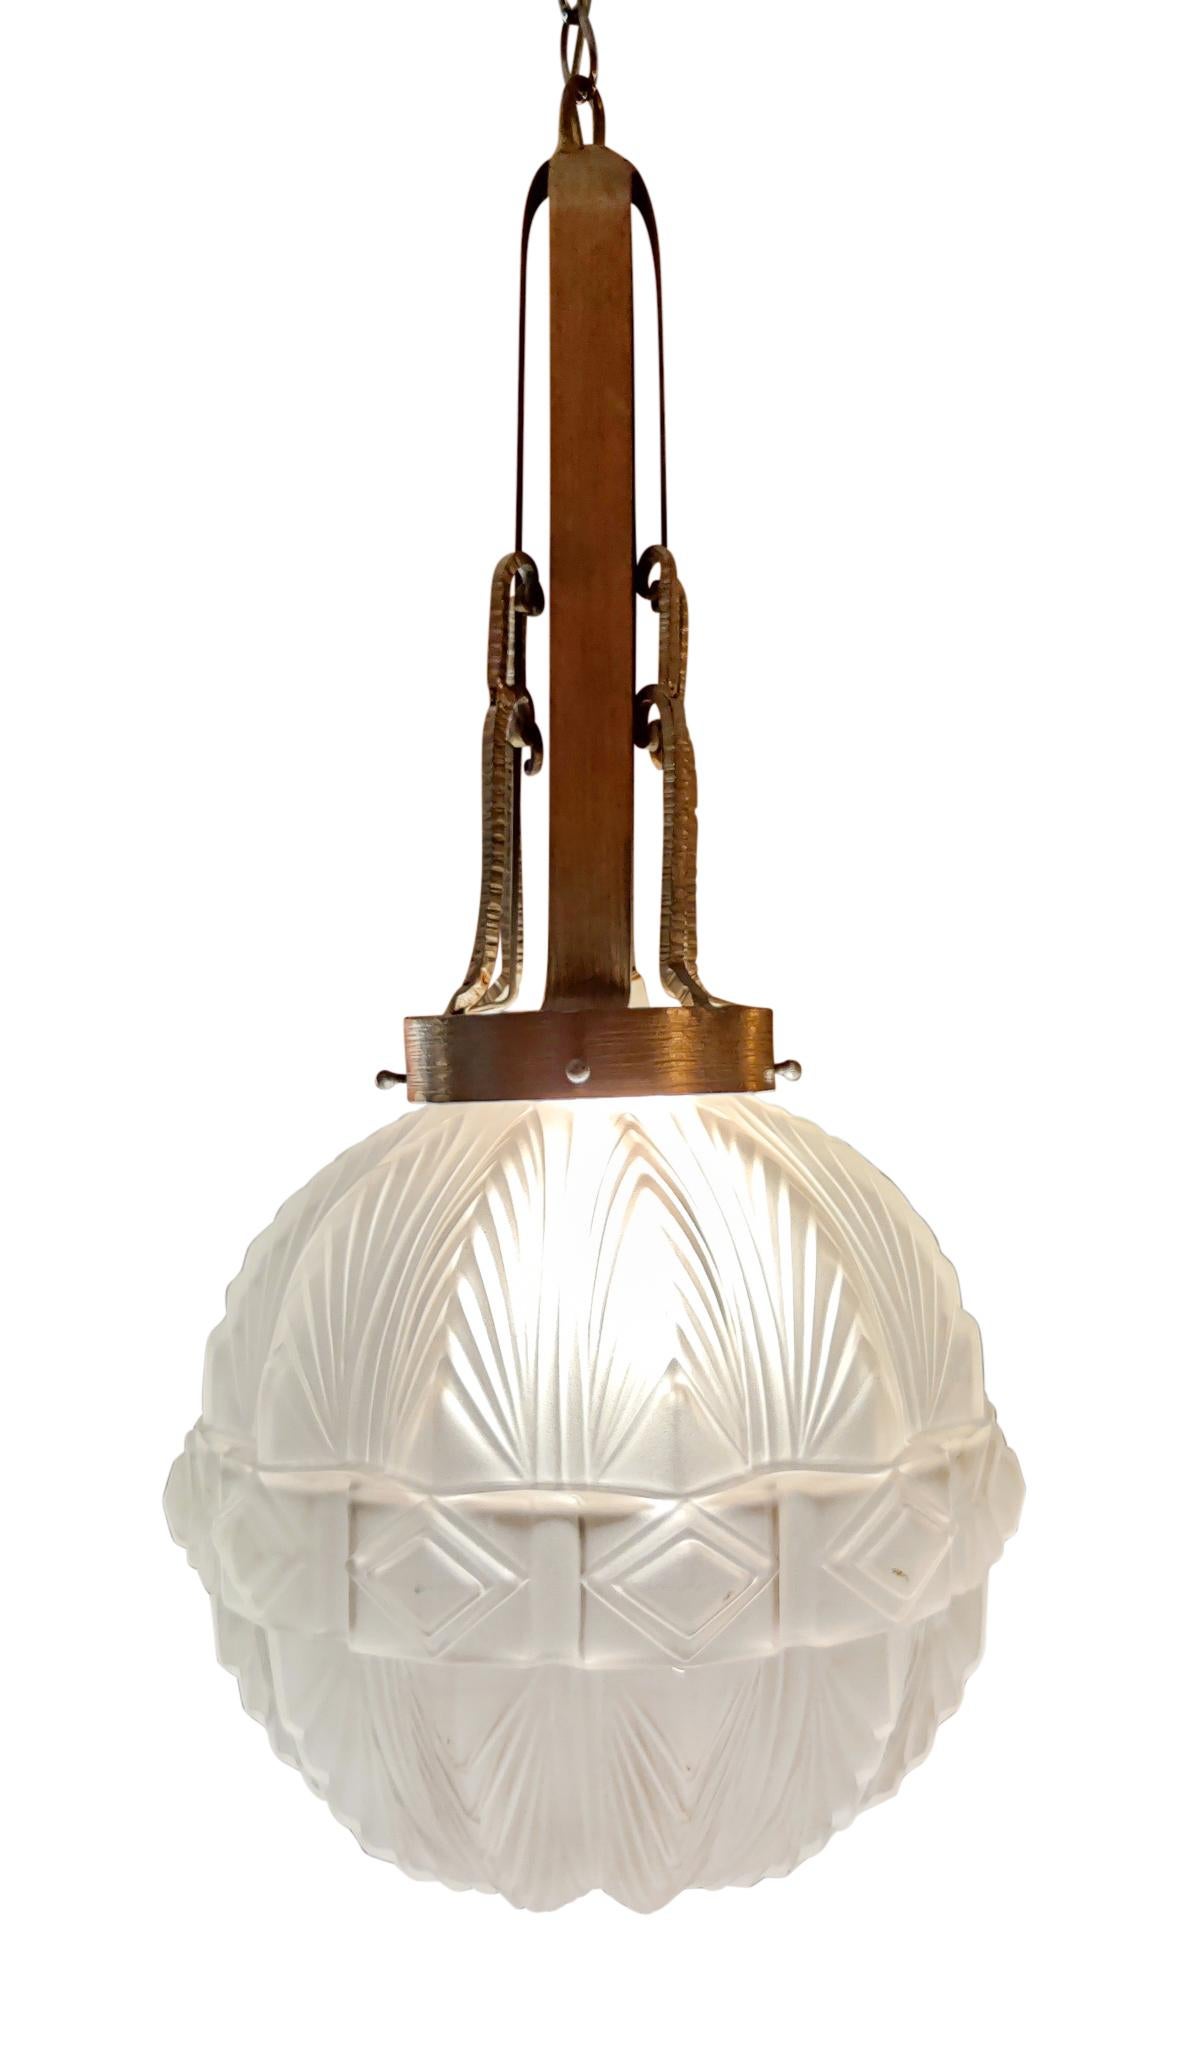 A beautiful Sabino attribution Art Deco lantern chandelier, single socket, standard incandescnet bulb, wattage variable, hardwired, and ready for use. Frosted glass globe is free of breaks and repairs and has no visible chips during normal use.